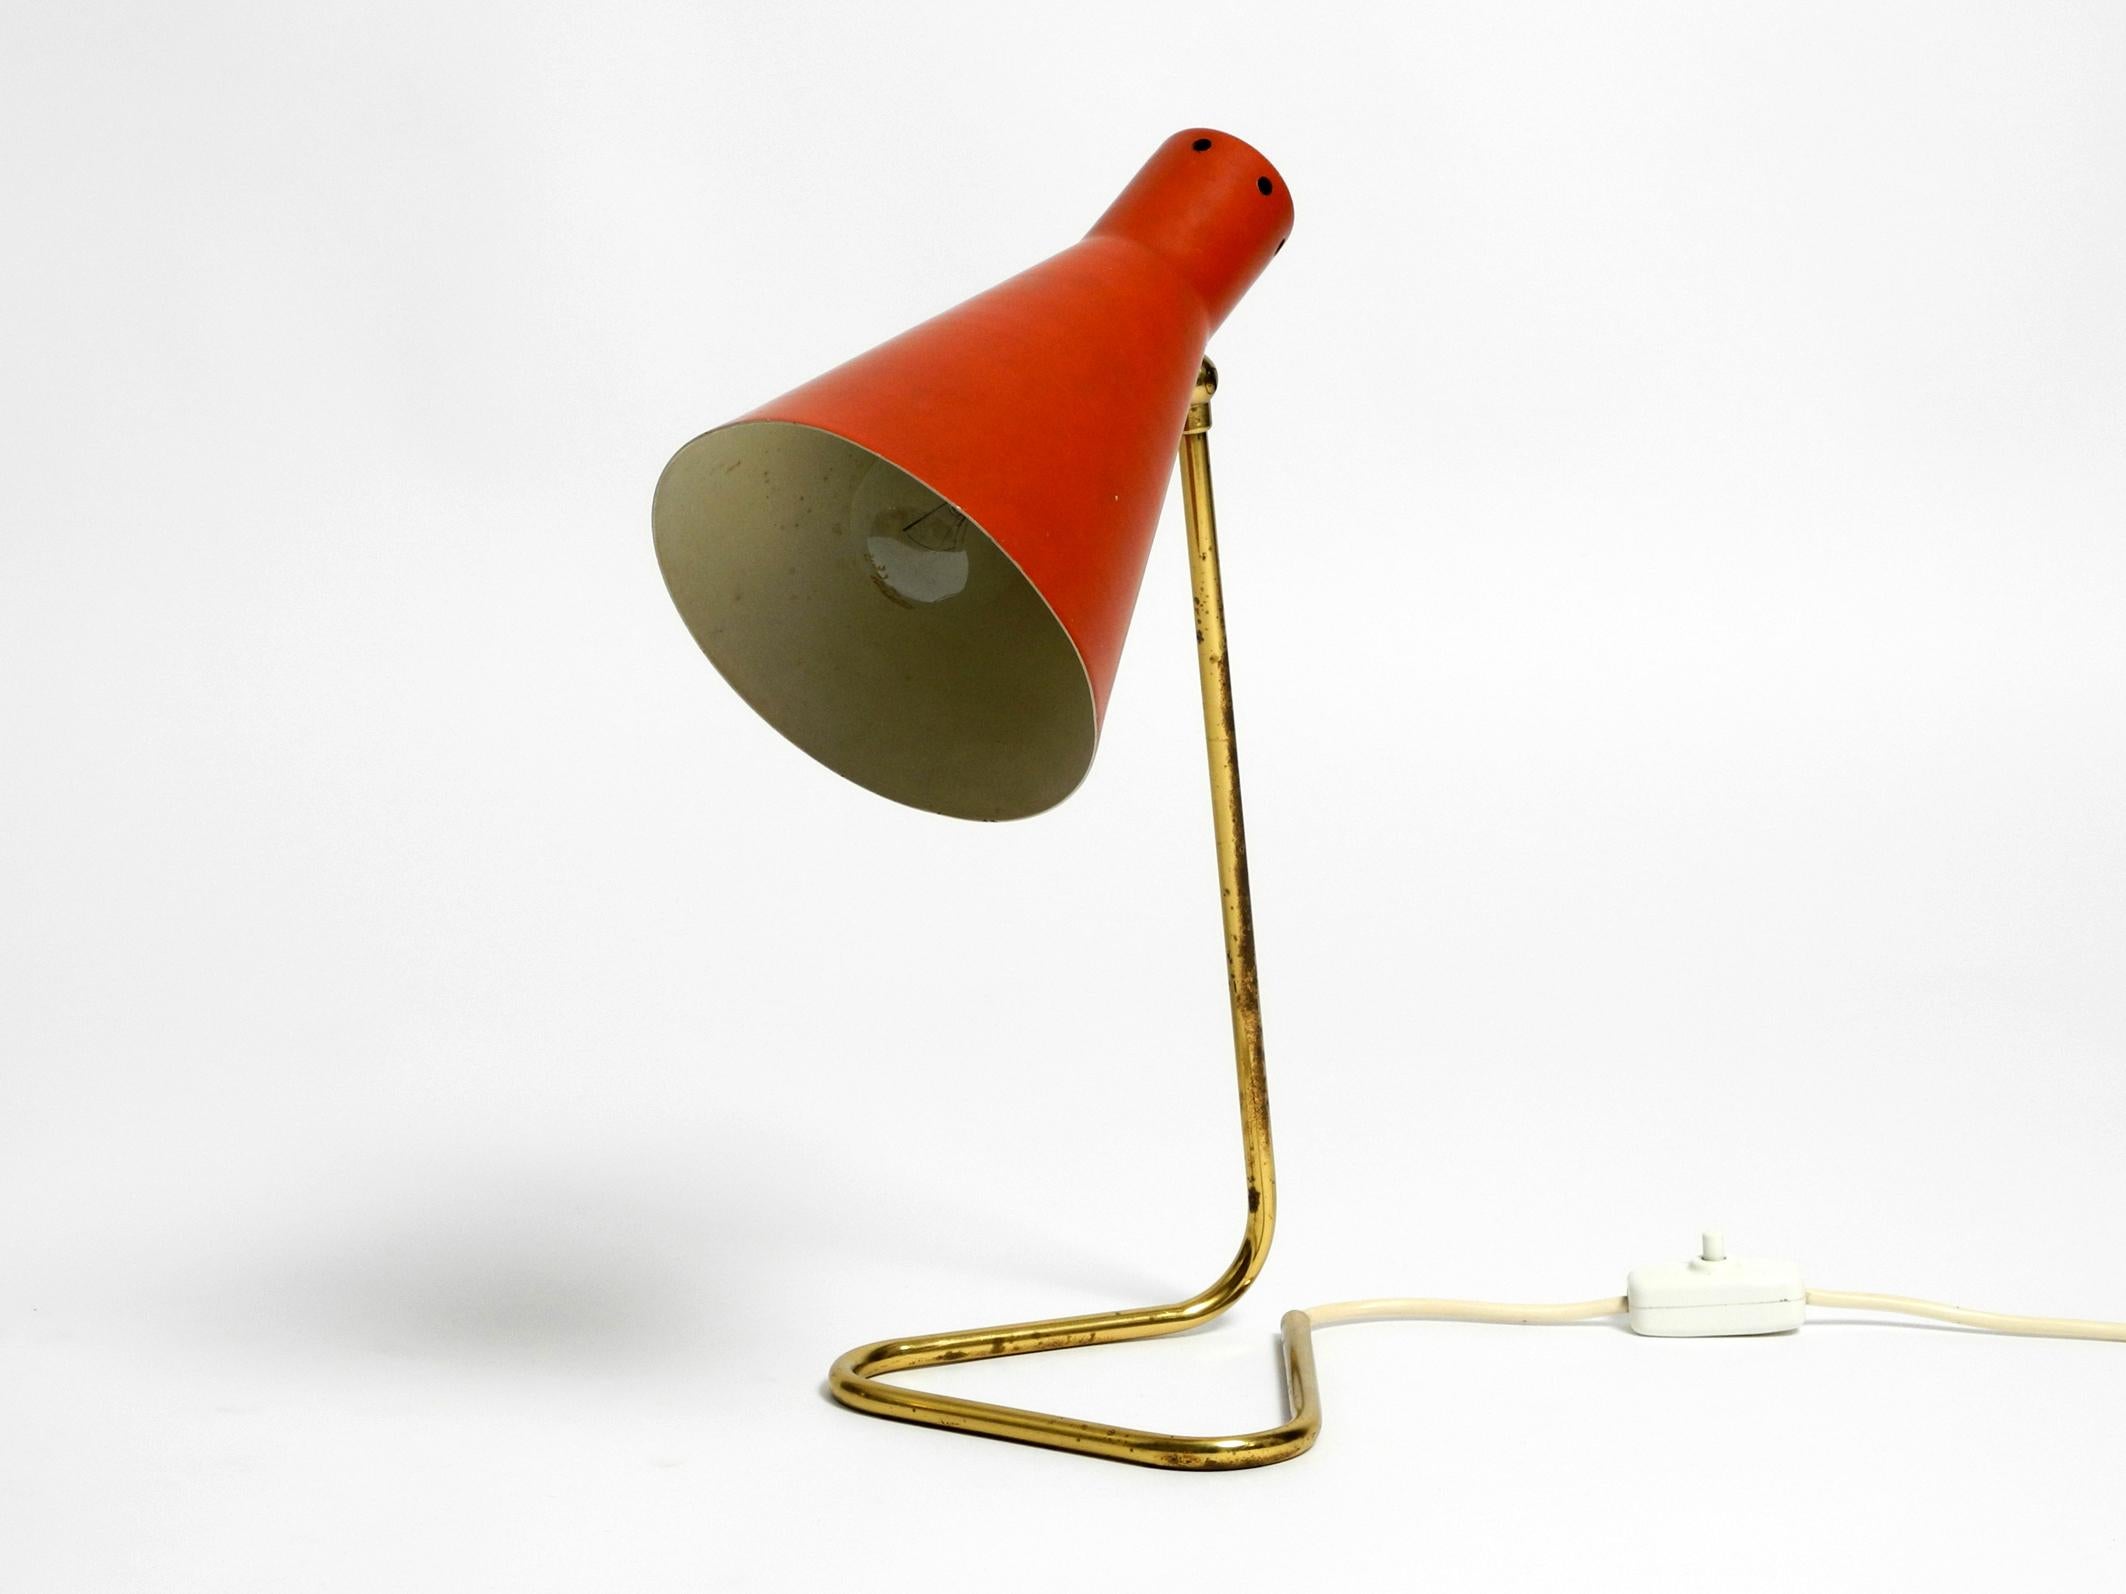 Large beautiful original 1950s table lamp. Probably from an Italian production.
Base and neck are made from a bent brass tube, with a cable run. The funnel shaped lampshade is made of metal lacquered in Brick Red. 
Very beautiful, typically